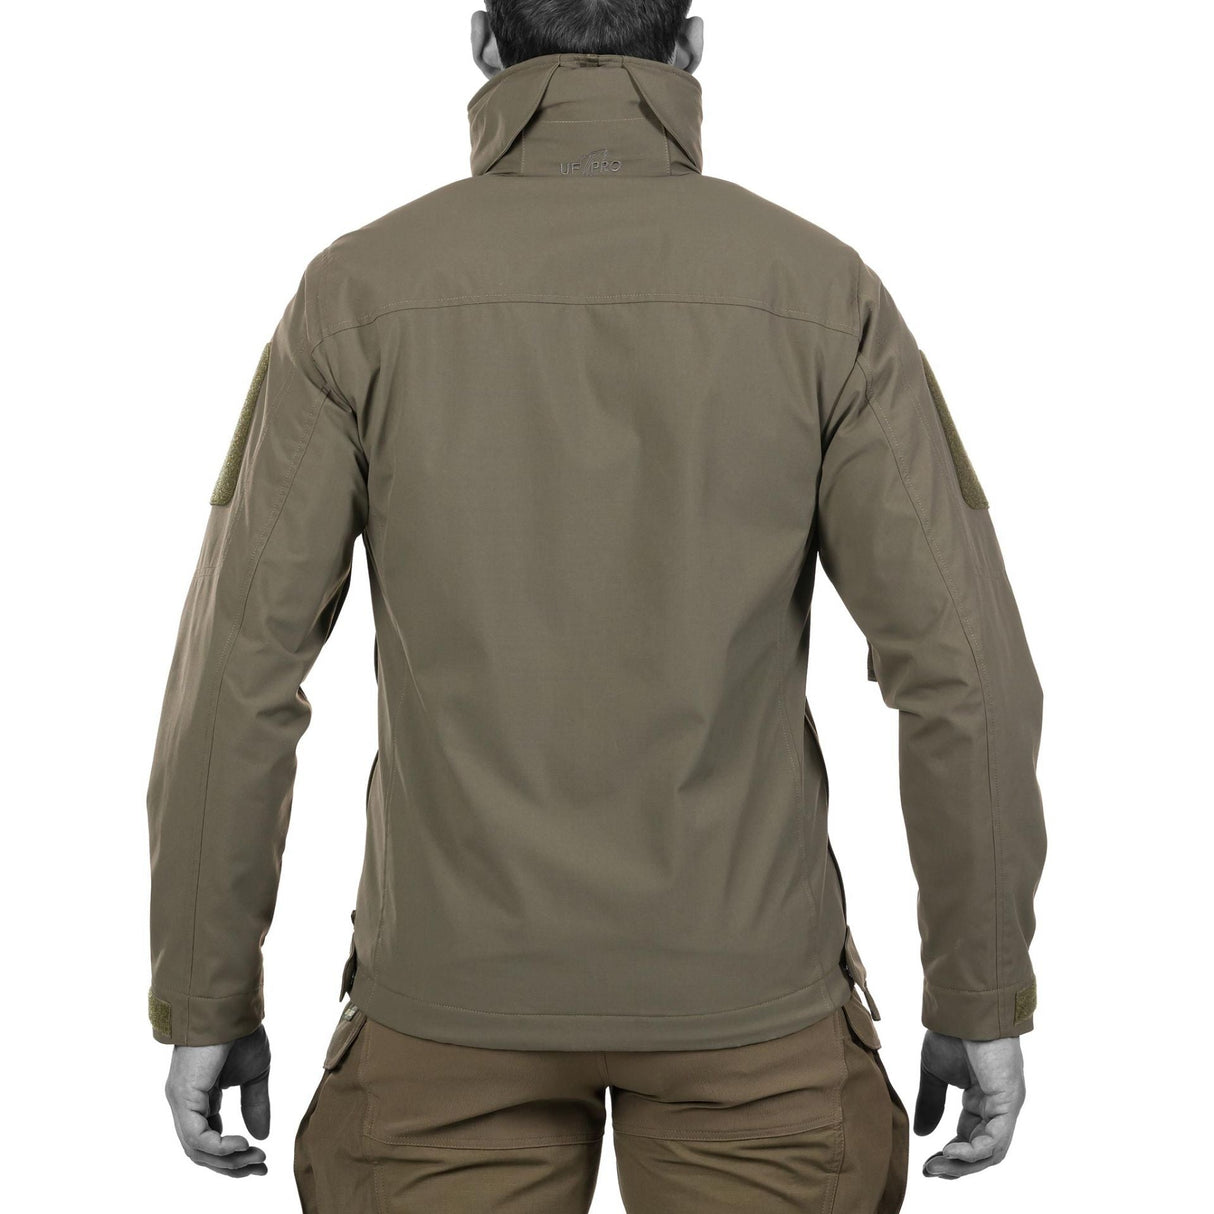 Experience superior protection with UF PRO Delta Eagle Gen.3 Tactical Softshell Jacket. Features long air vents for easy temperature regulation.